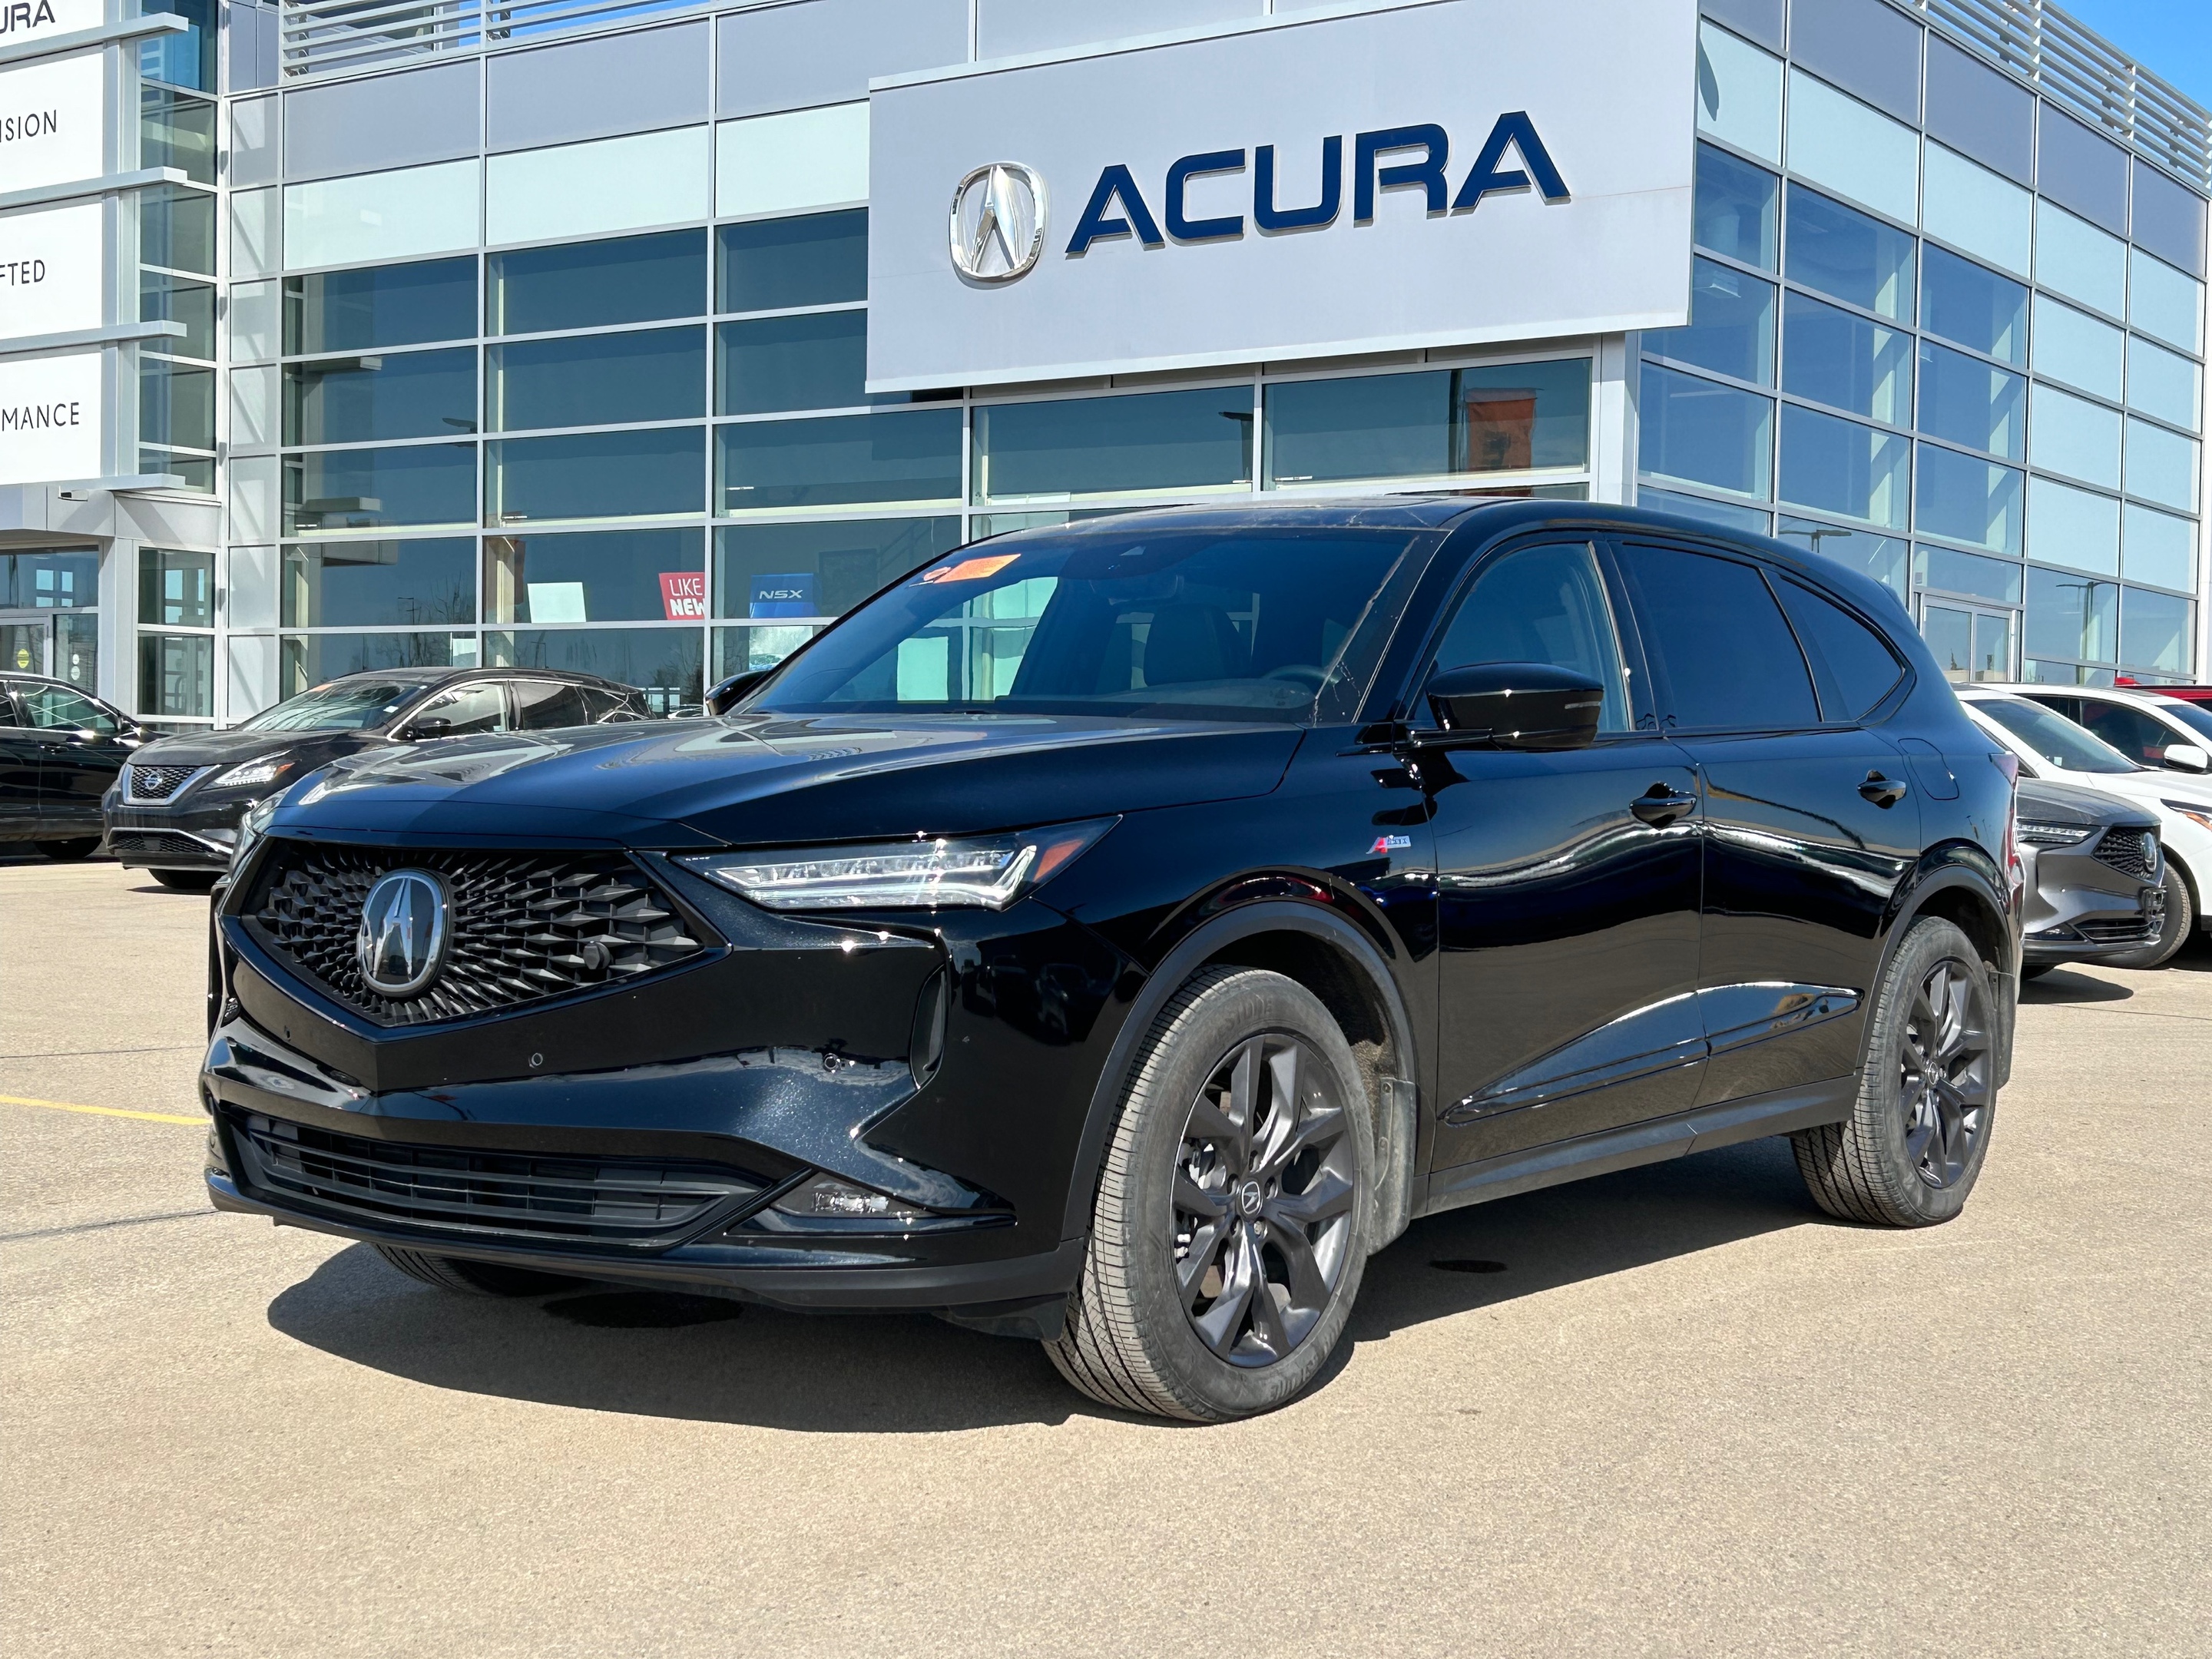 2022 Acura MDX A-Spec FRESH ON THE LOT SPECIAL!!!